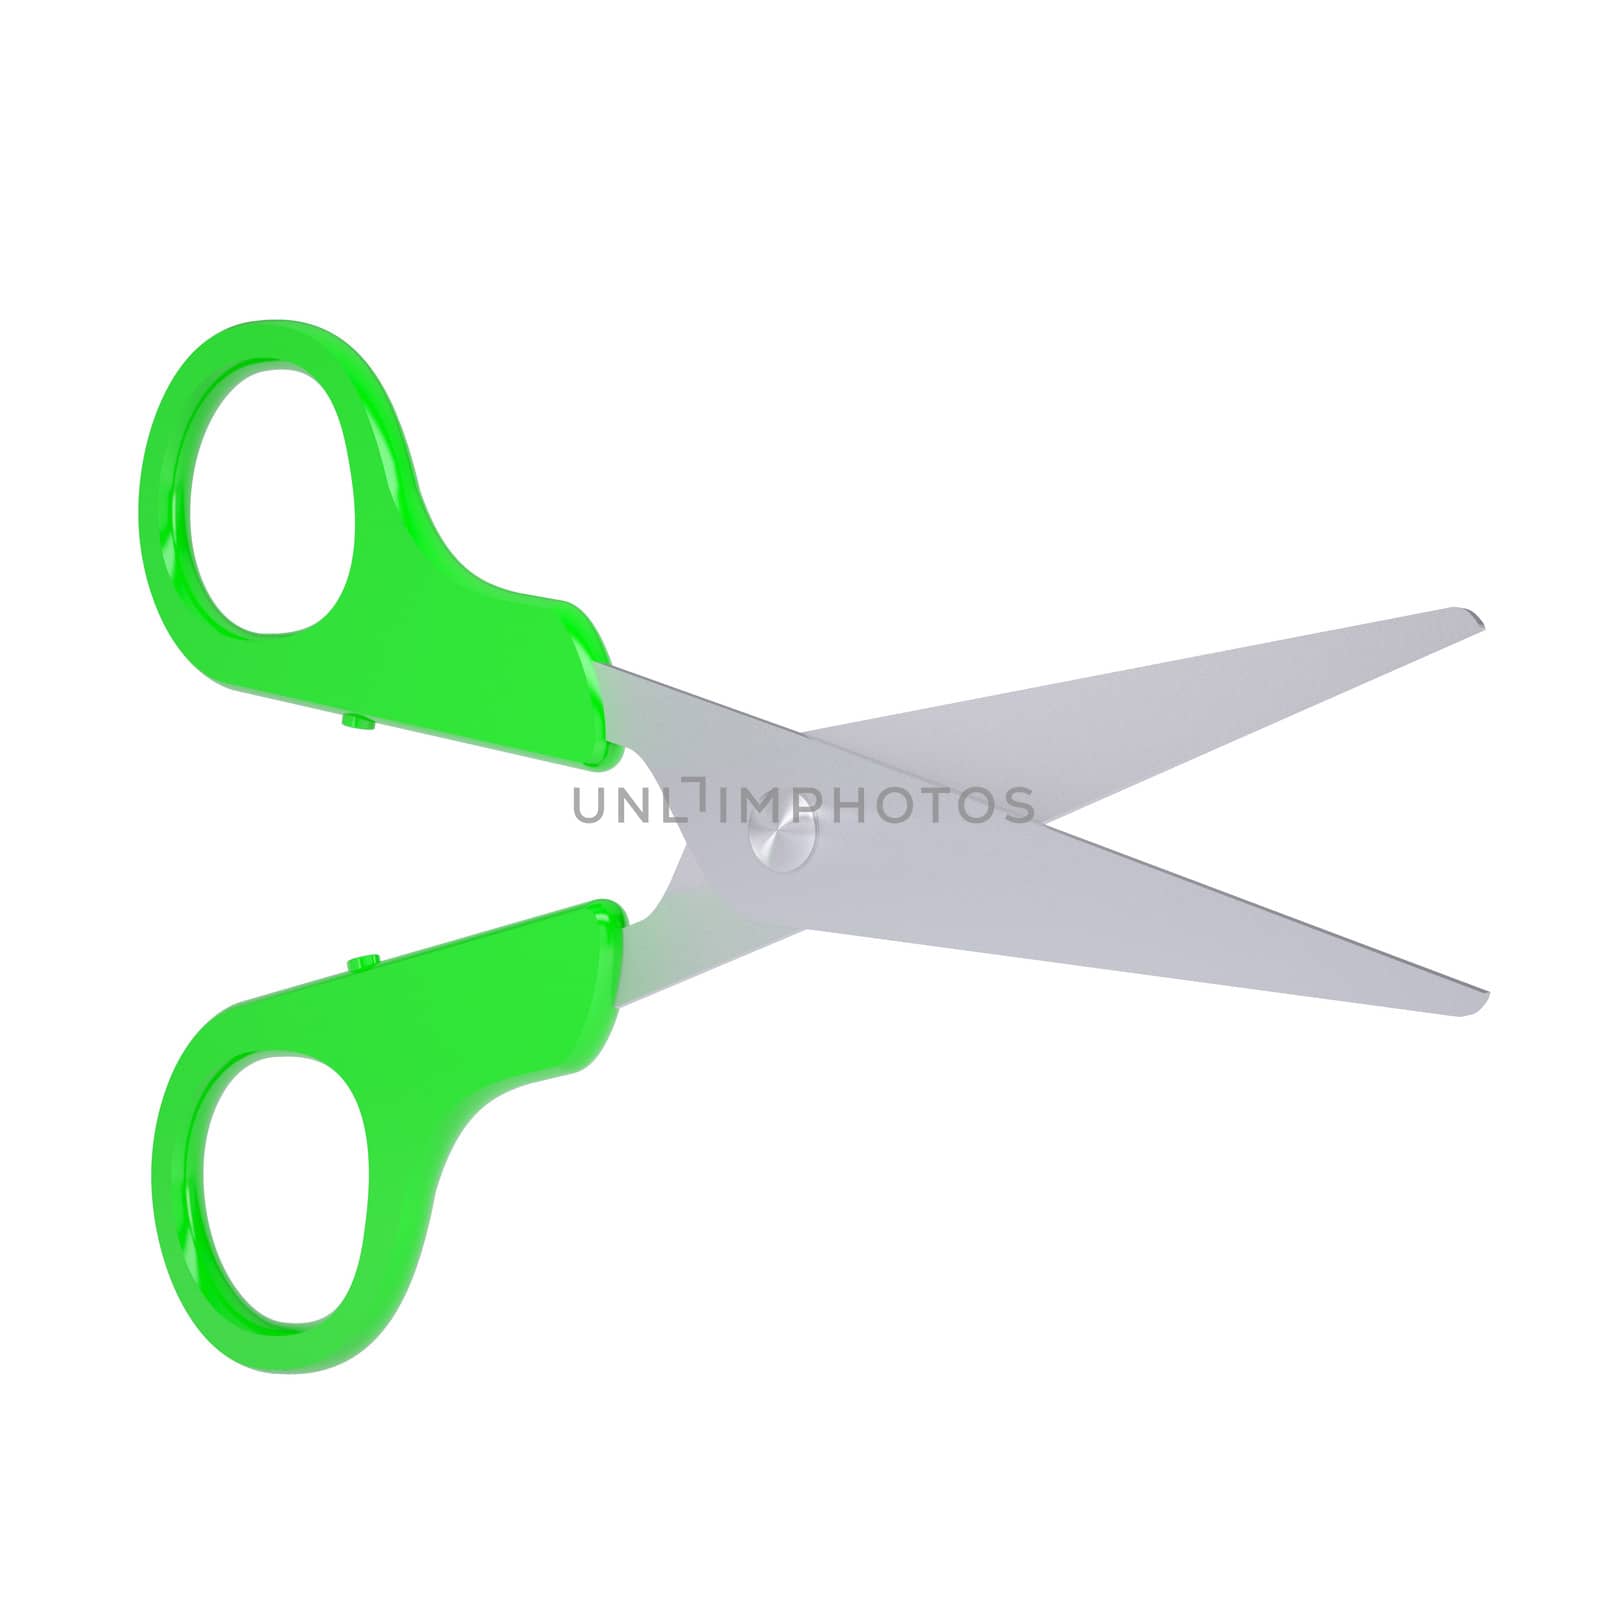 Scissors with green handles by cherezoff